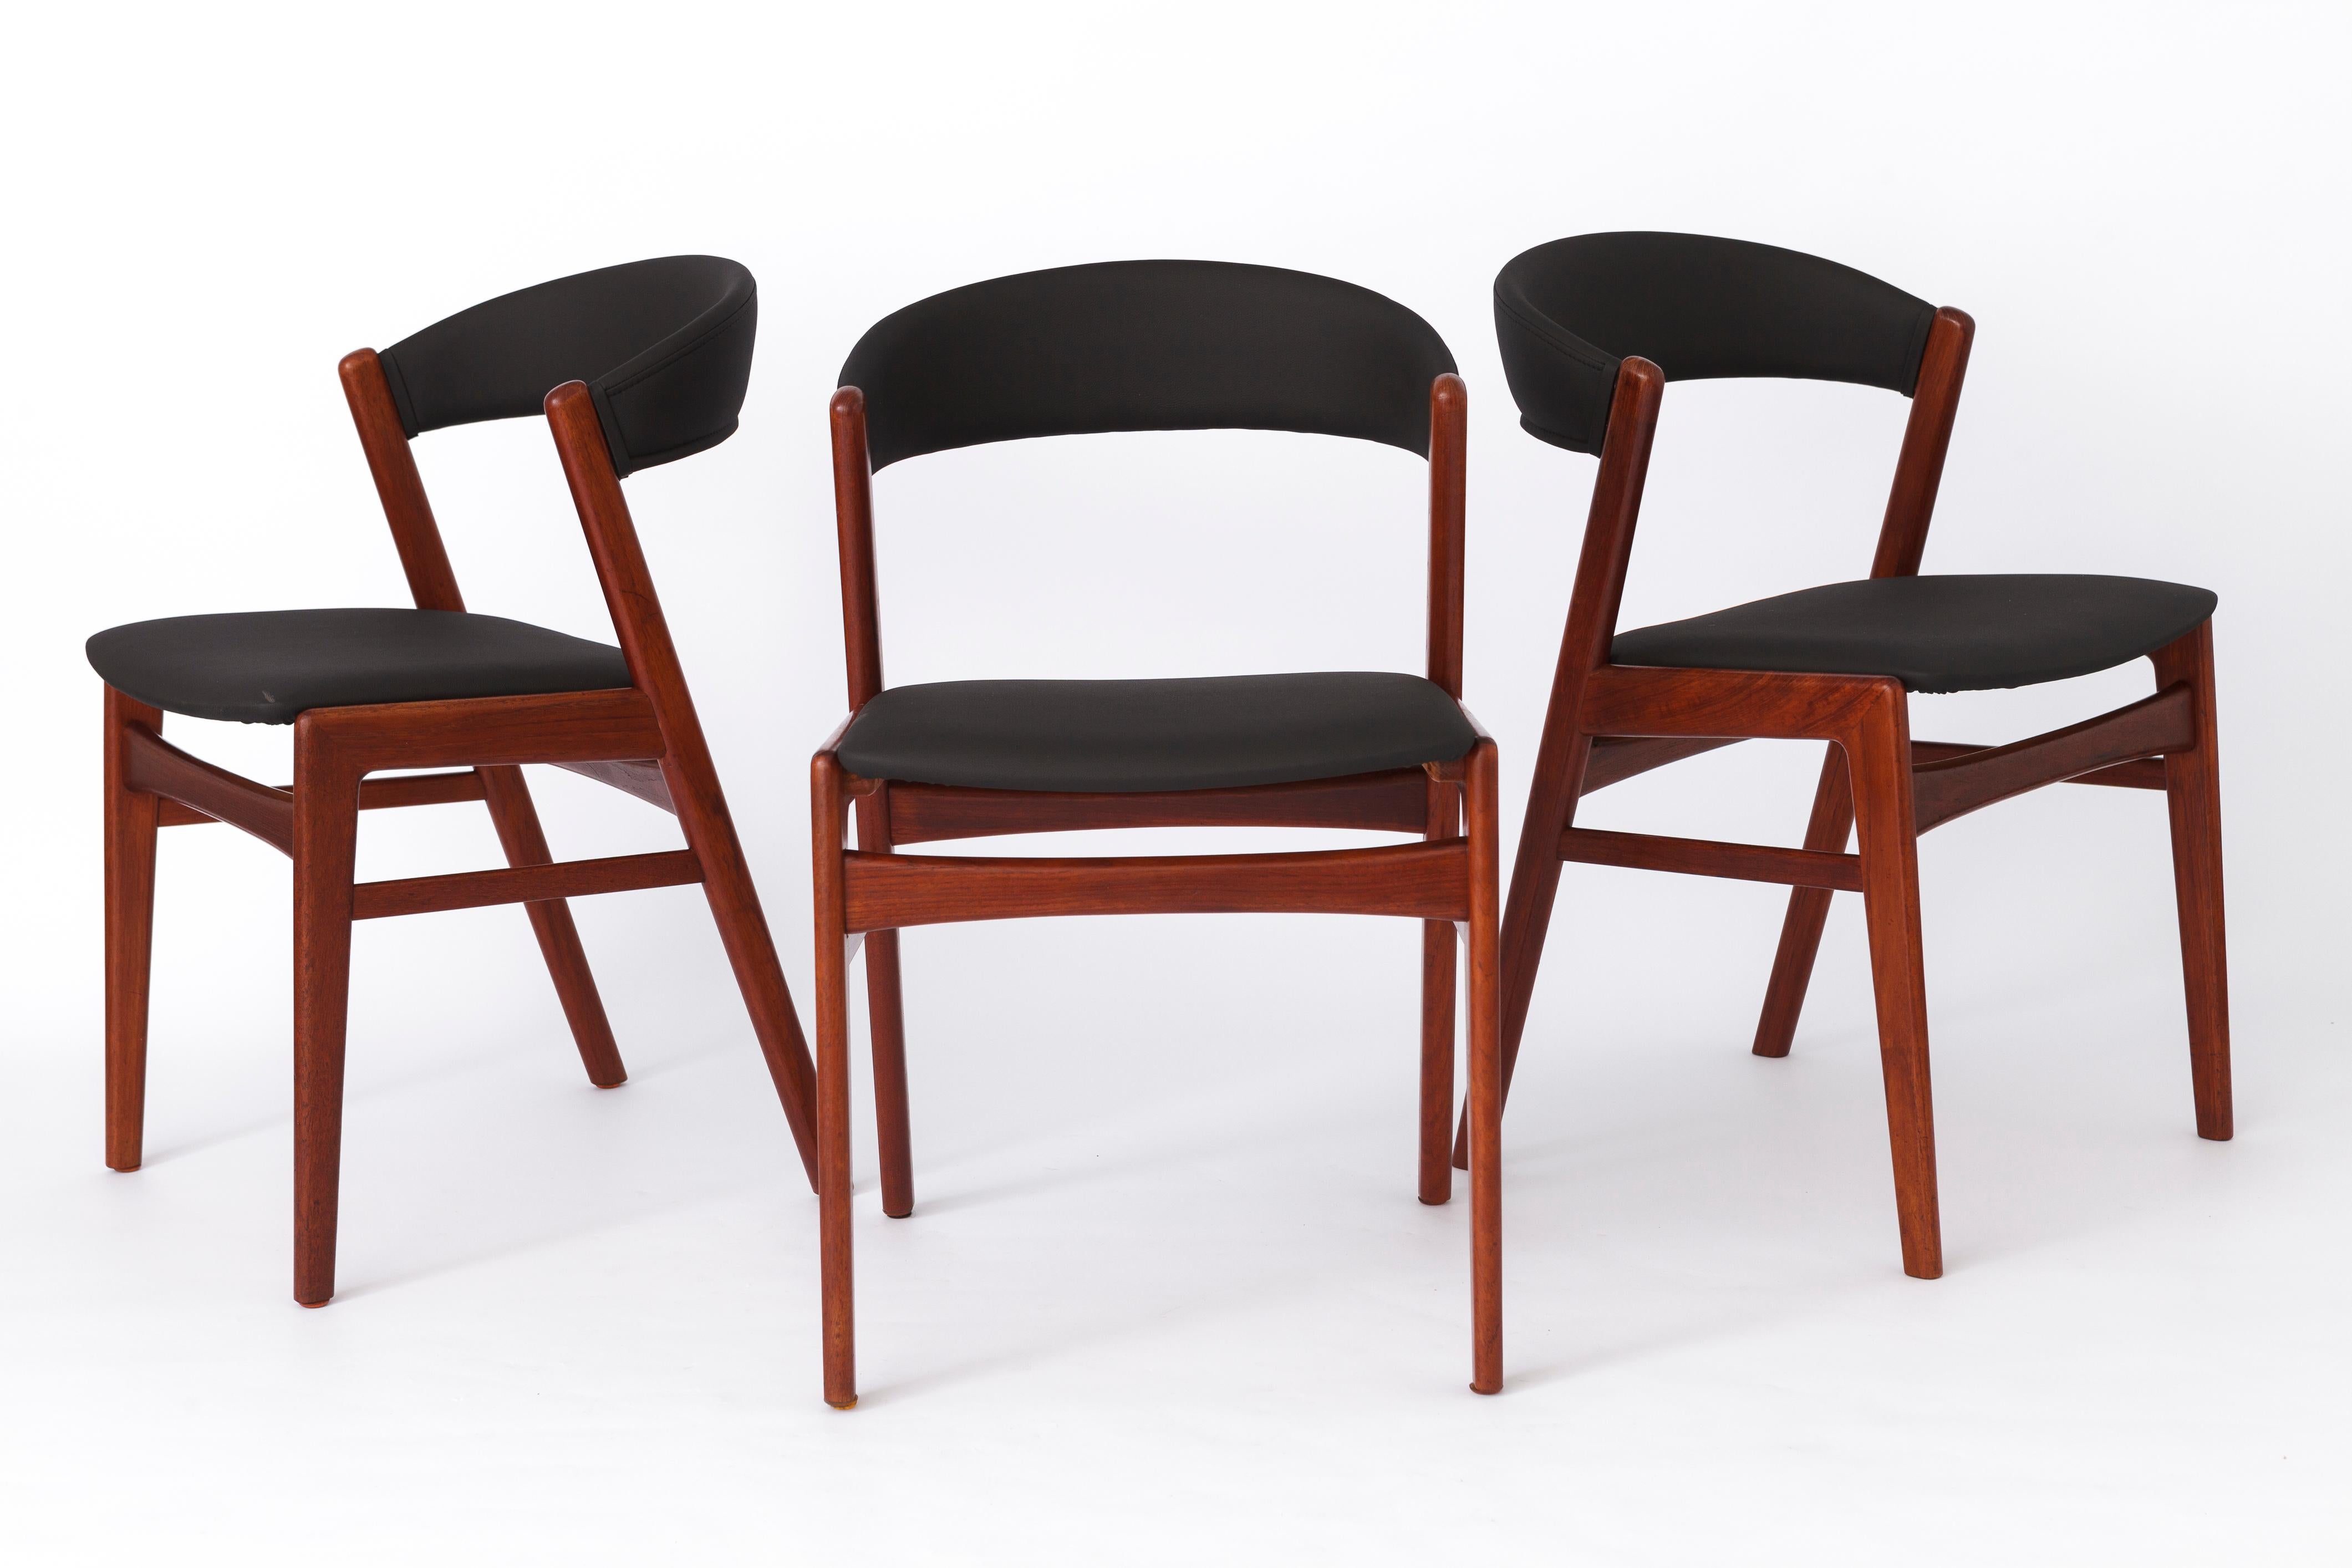 Mid-Century Modern 6 Vintage Chairs DUX - Ribbon Back 1960s, Sweden - Dining chairs, Teak, Set of 6 For Sale